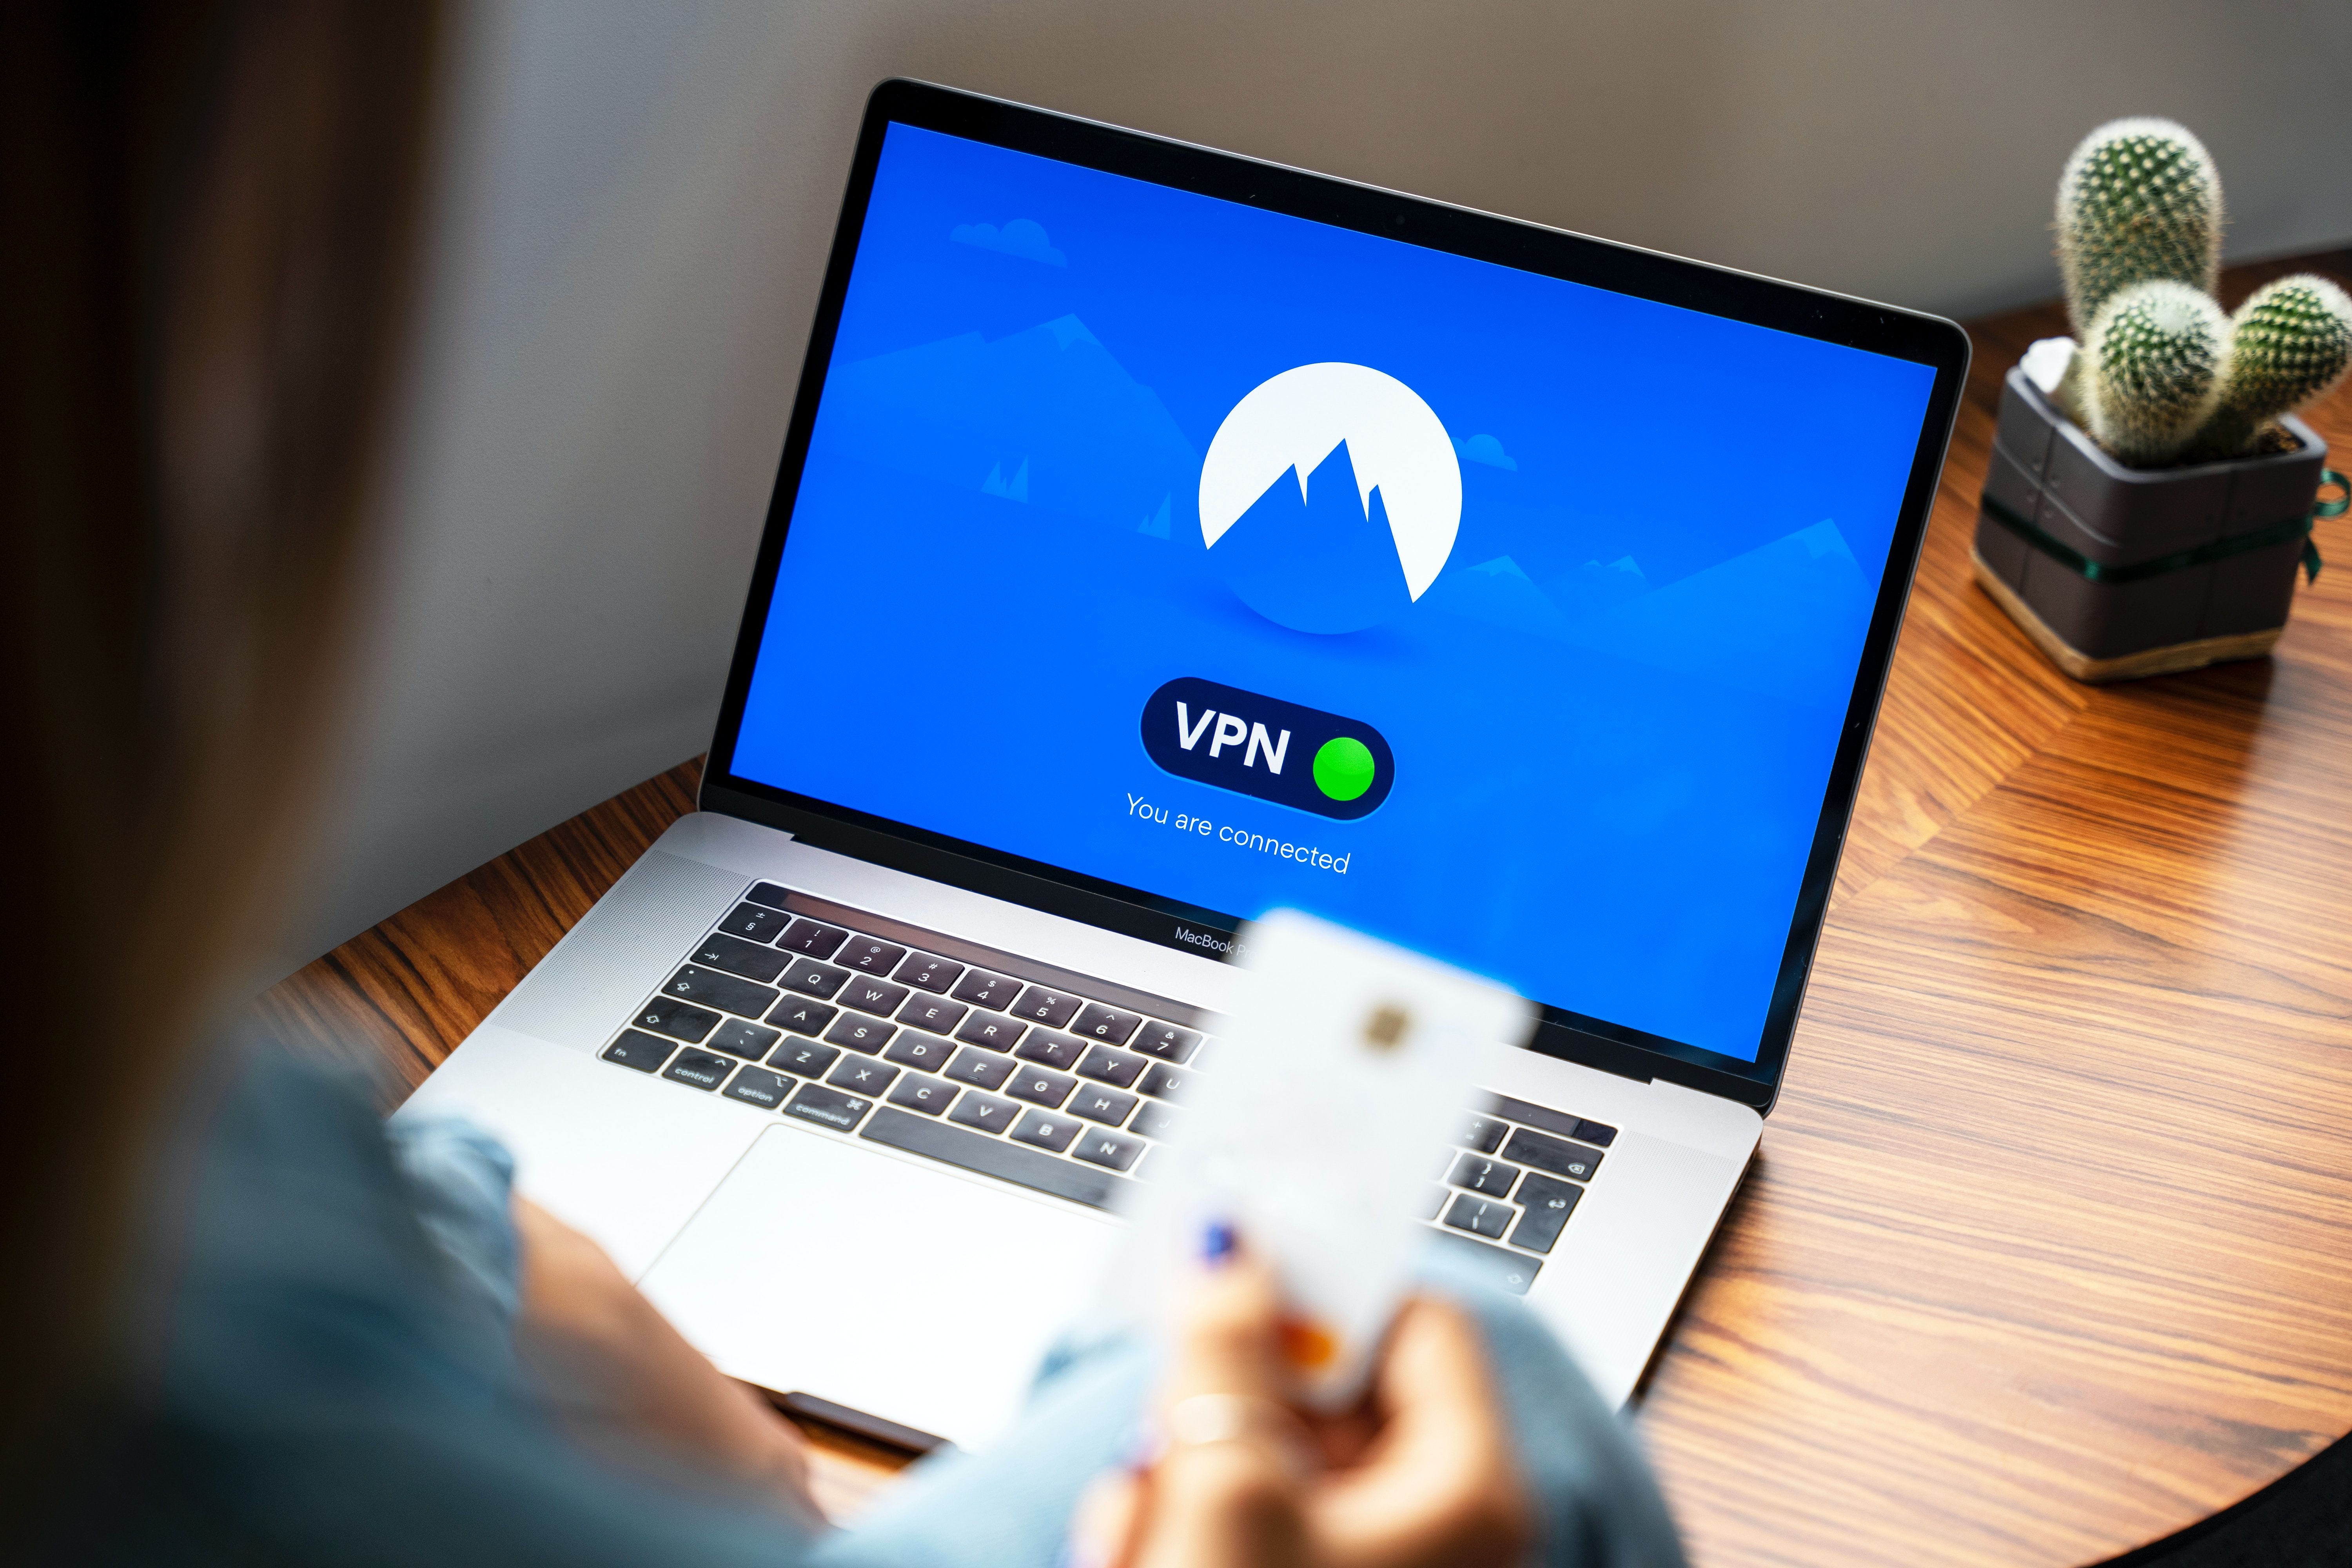 Person using VPN on laptop